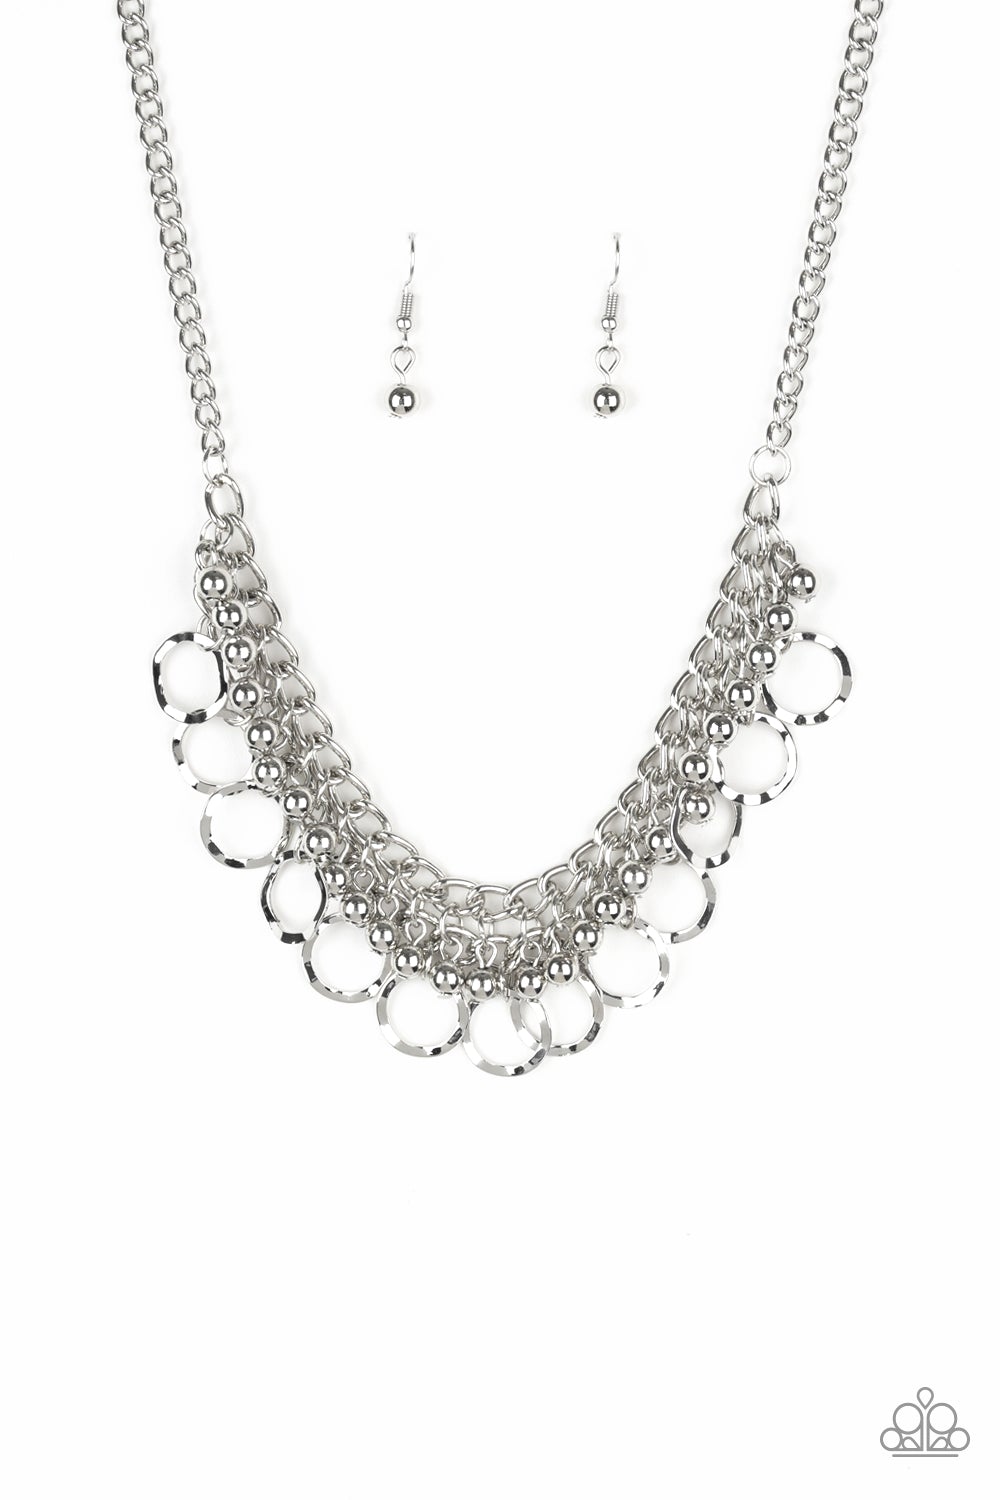 Ring Leader Radiance Silver Necklace